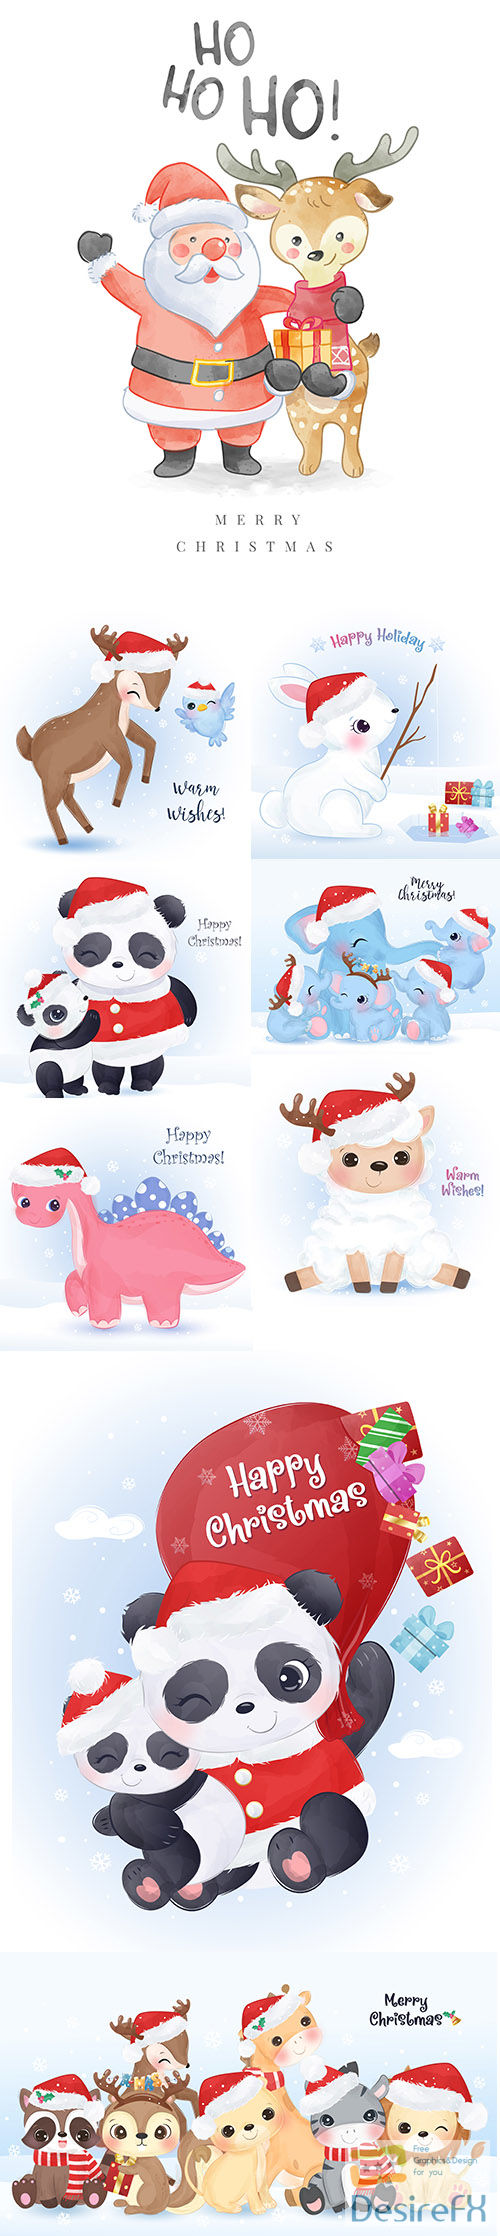 Christmas greeting card with cute animals